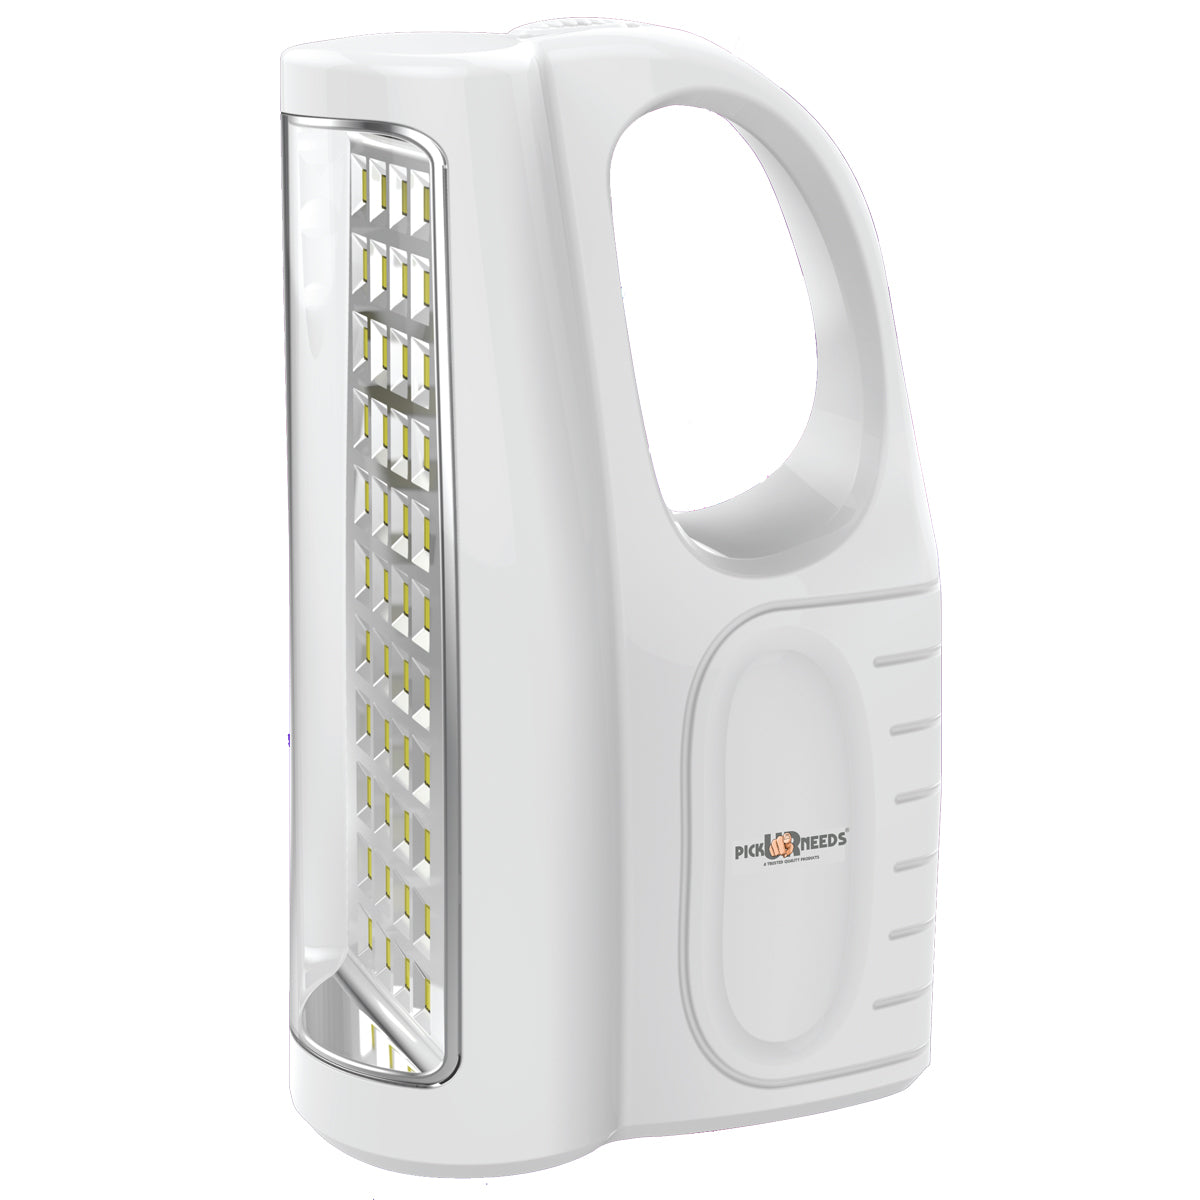 Pick Ur Needs Rechargeable Home Emergency LED lamp 44 Led Chargeable Home 10 hrs Lantern Emergency Light